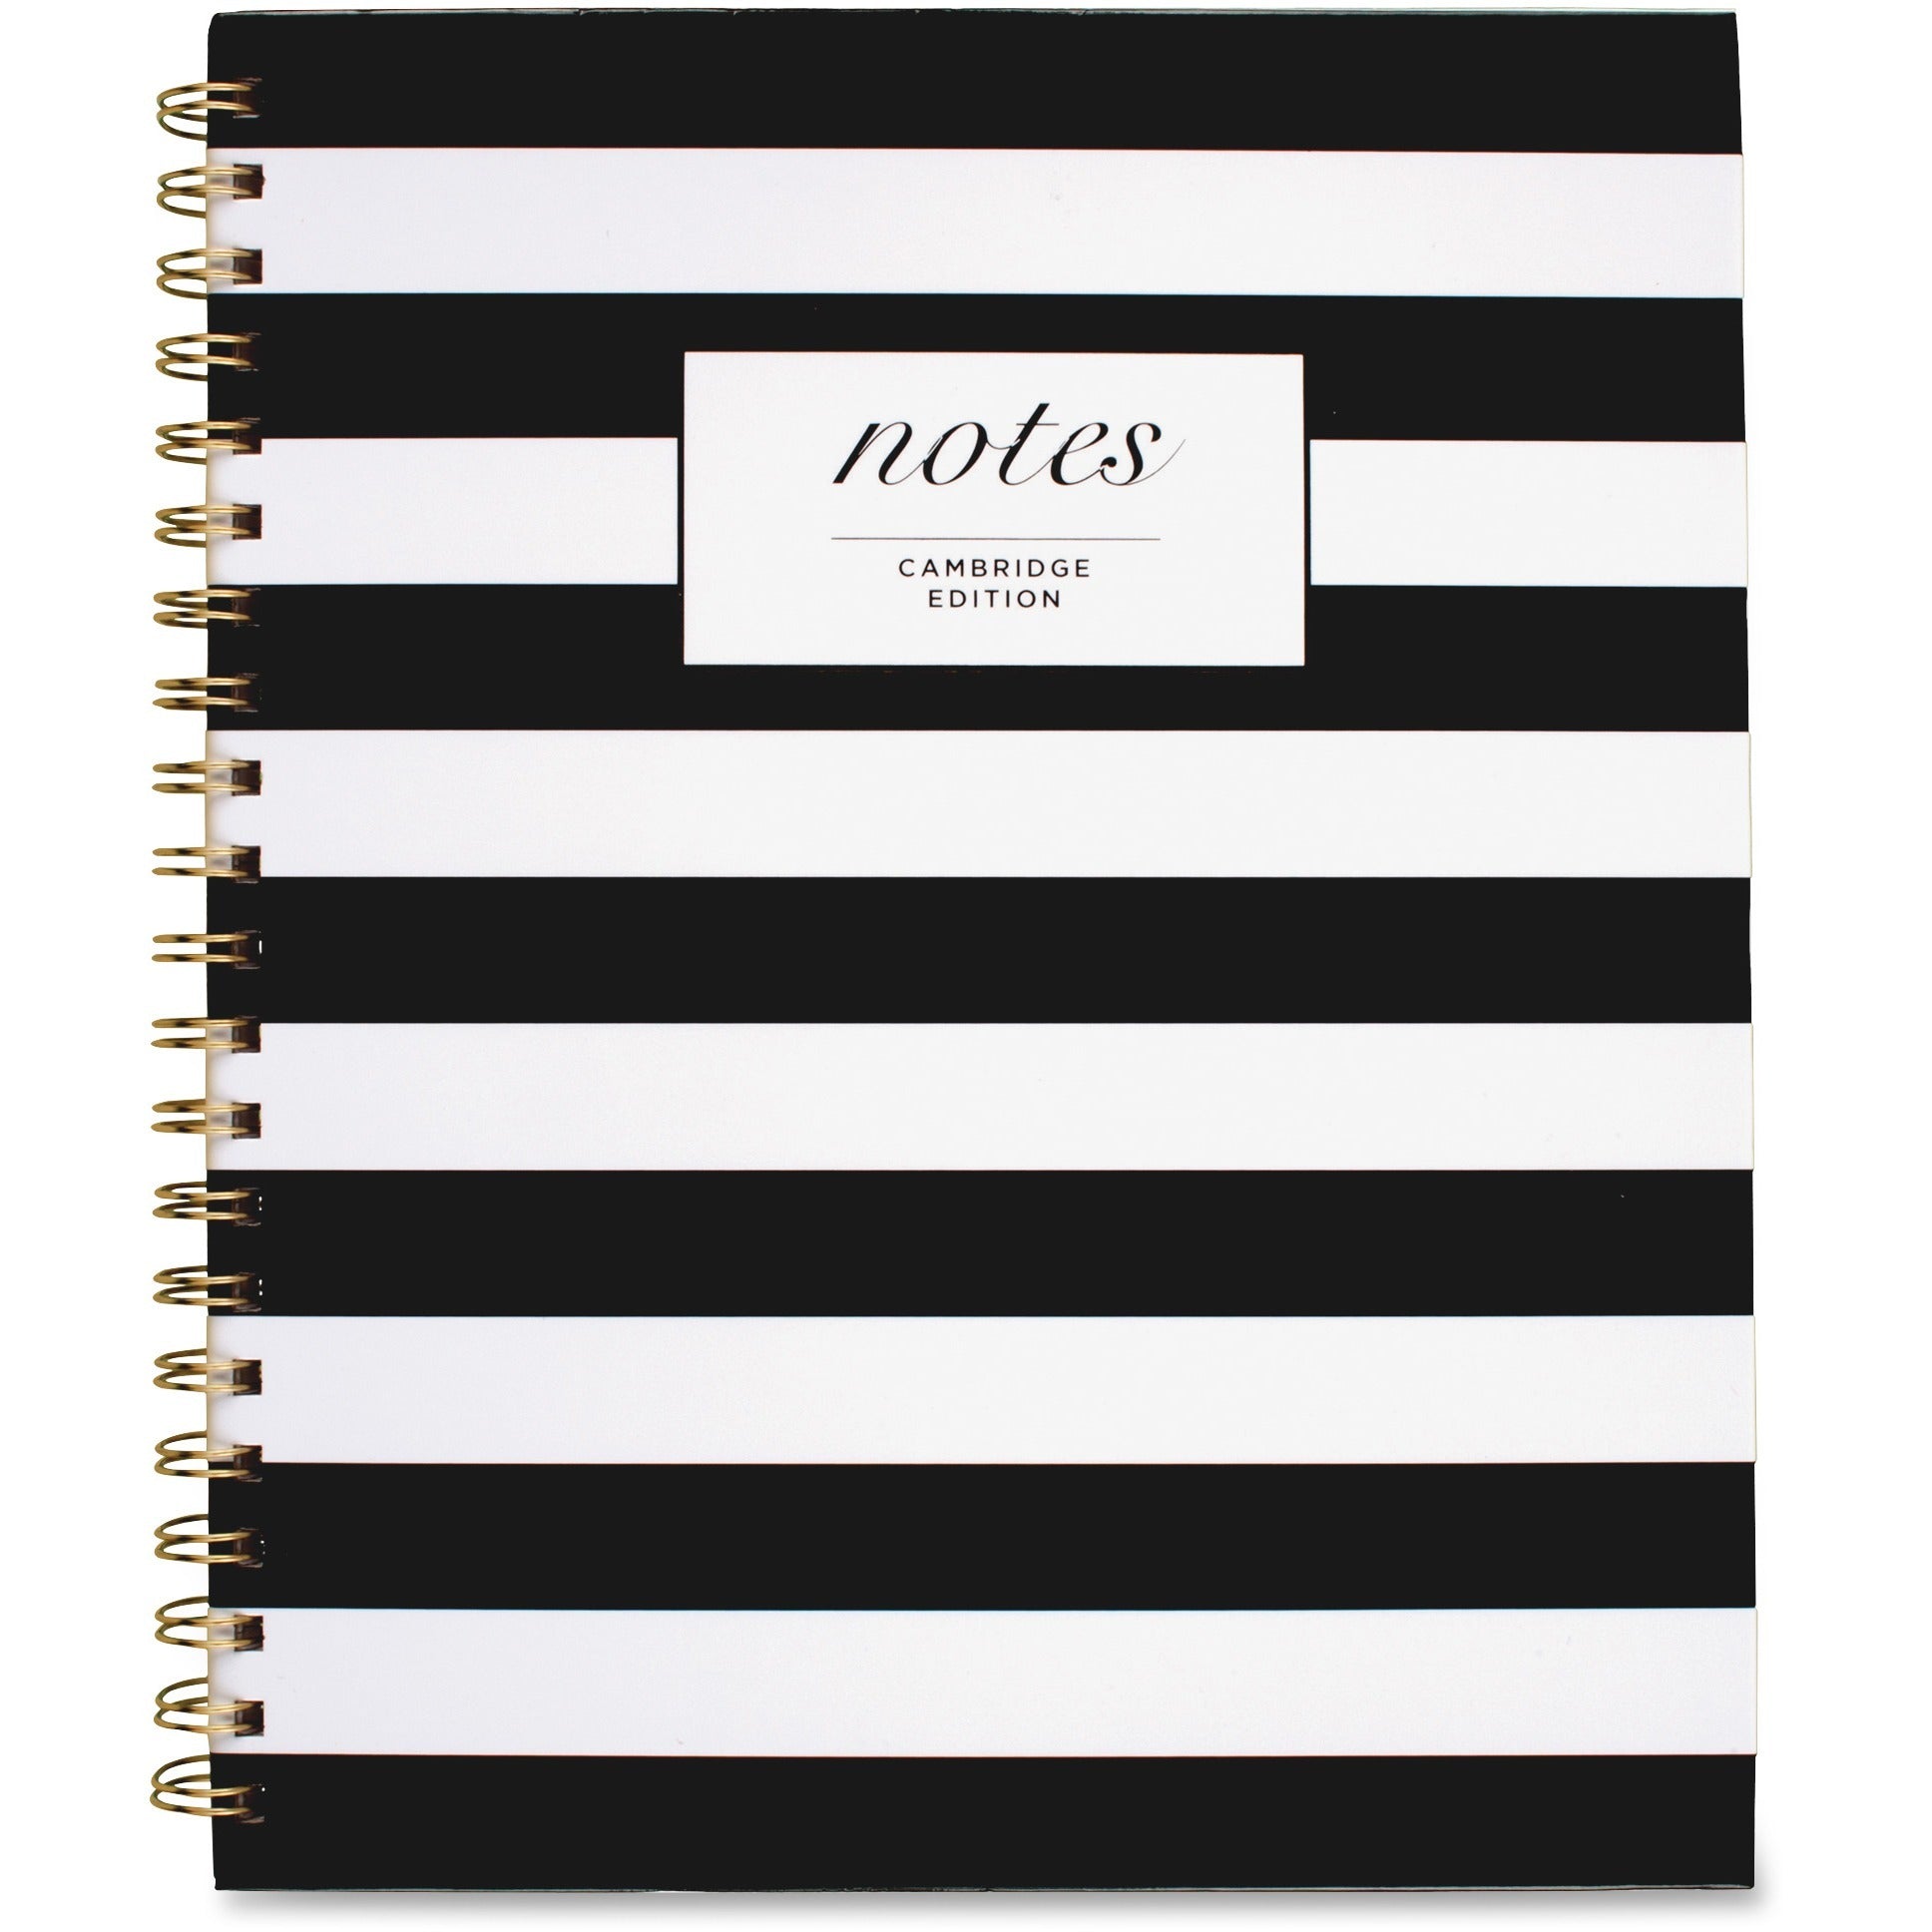 cambridge-hardcover-wirebound-notebook-160-pages-twin-wirebound-both-side-ruling-surface-ruled-11-x-8-7-8-black-&-white-stripe-cover-hard-cover-dual-sided-1-each_mea59010 - 2